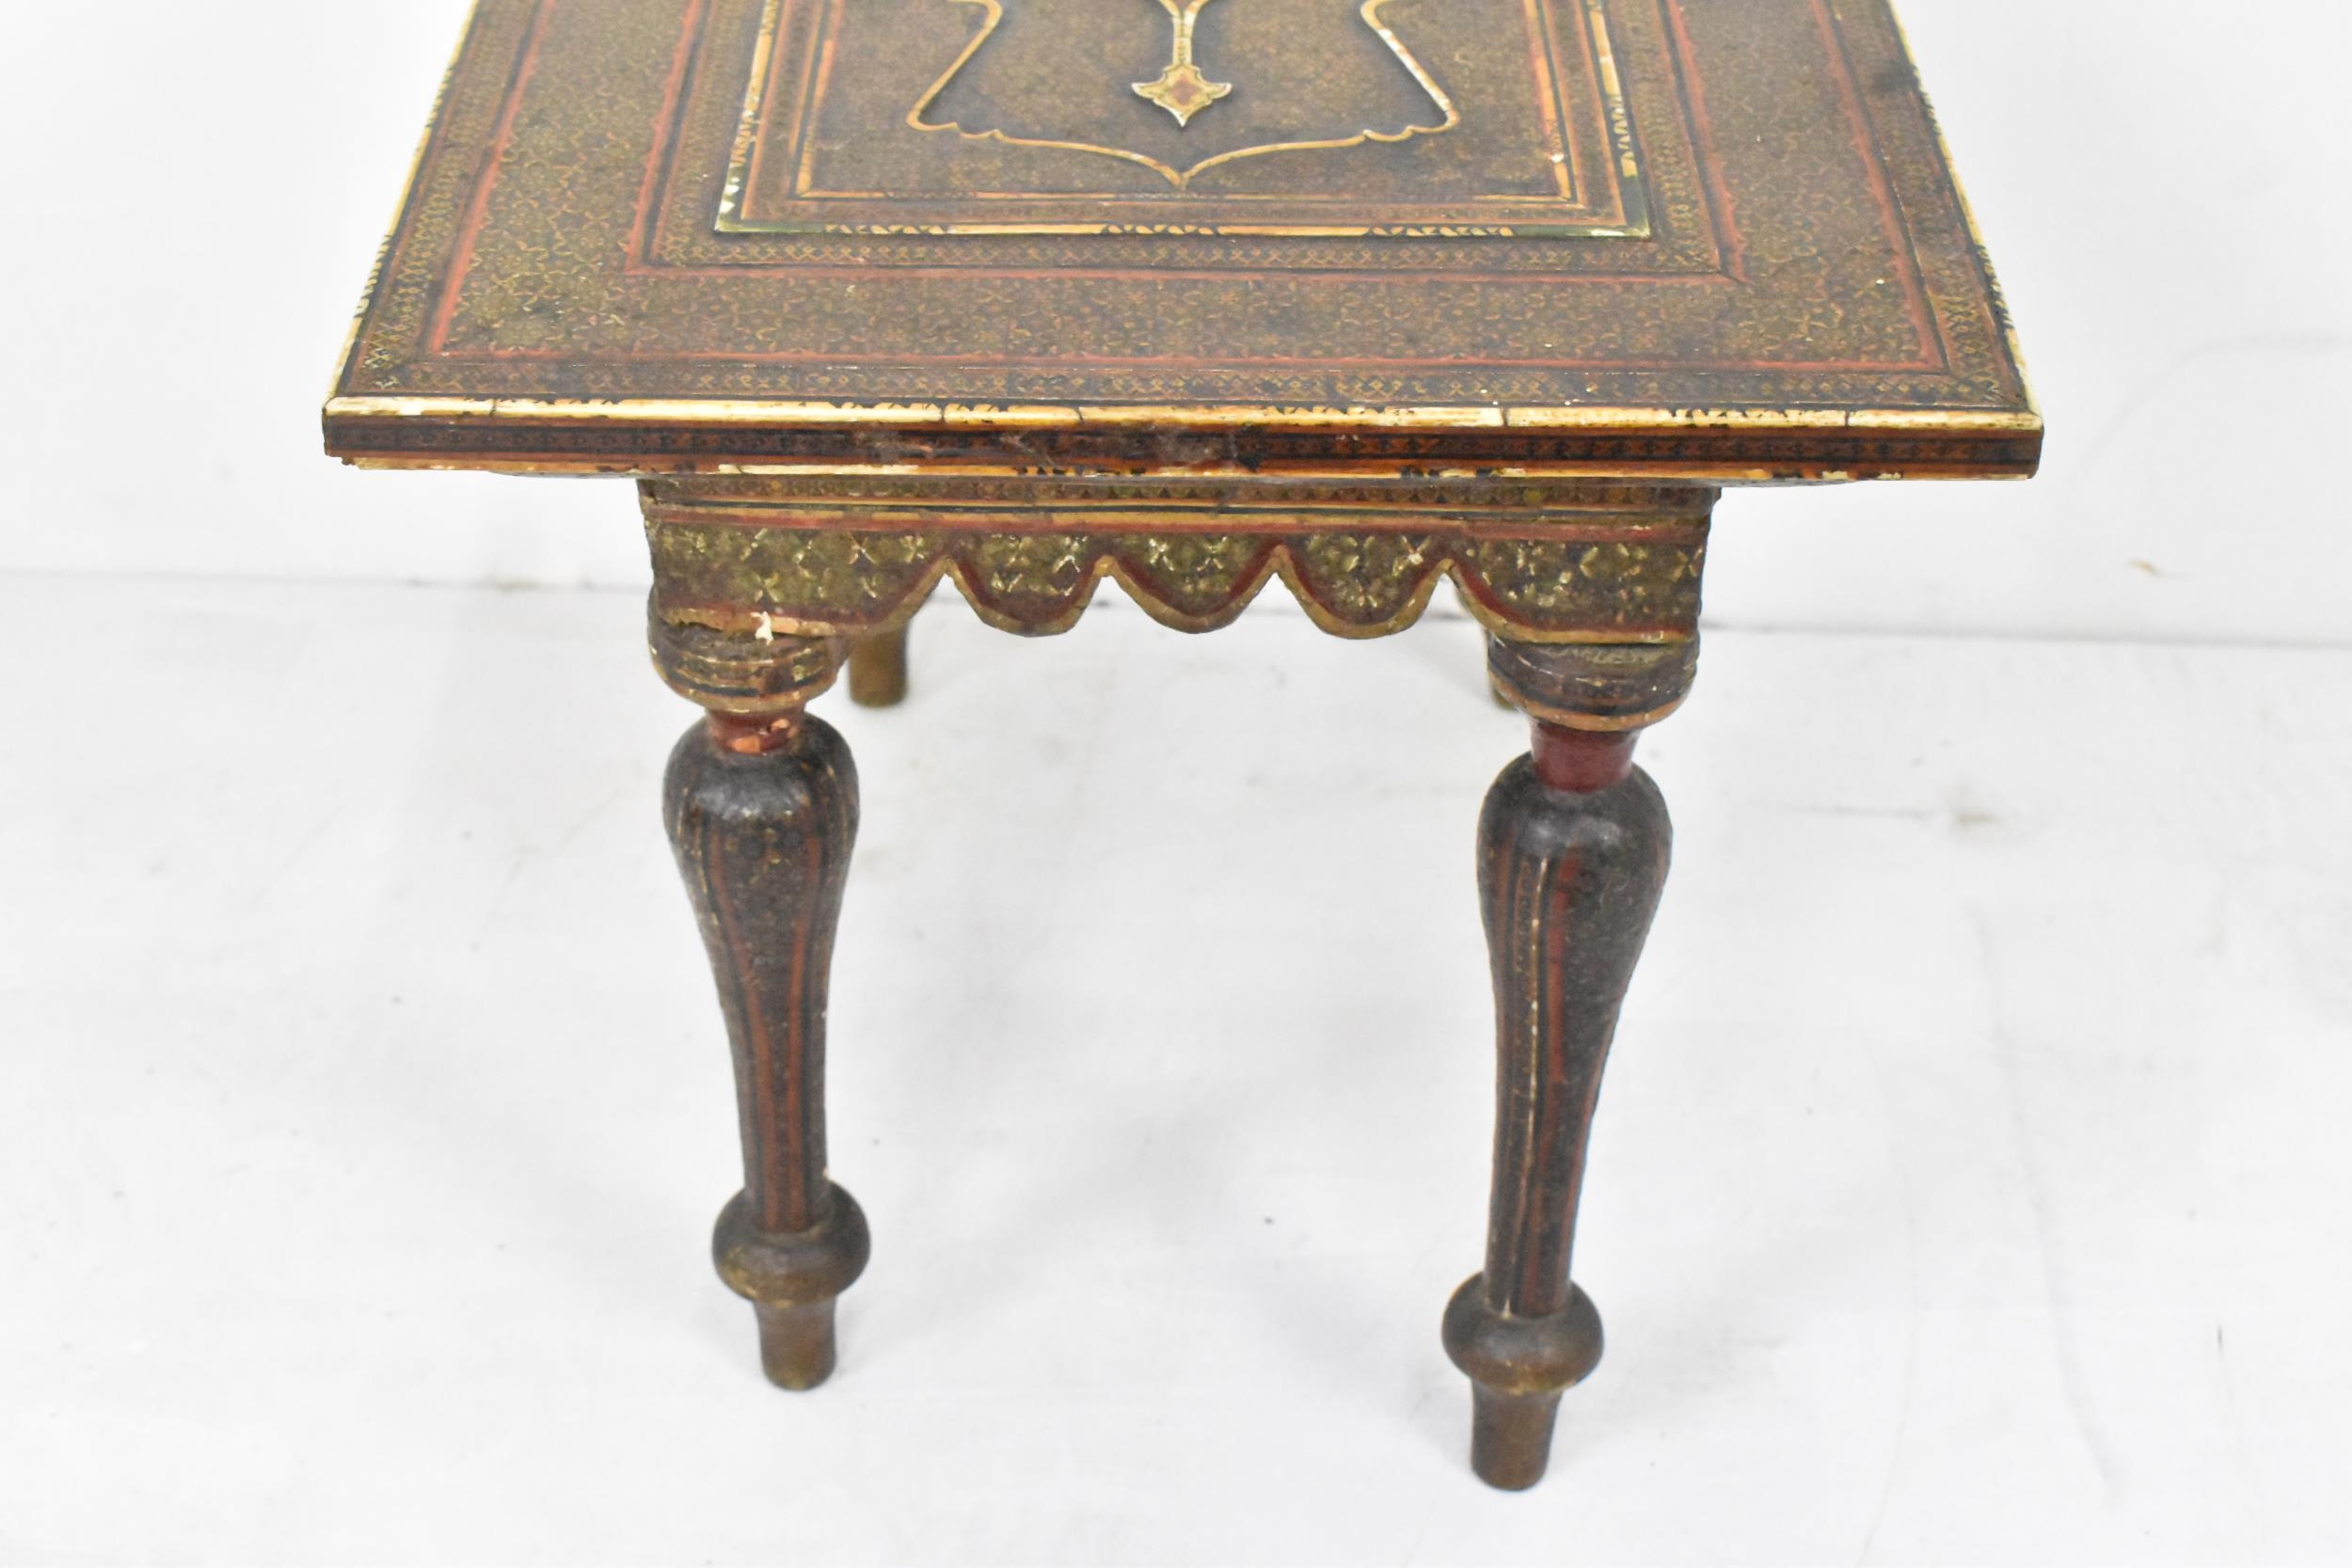 A late 19th/early 20th century Persian small occasional table, profusely inlaid with micro-mosaic - Image 4 of 5